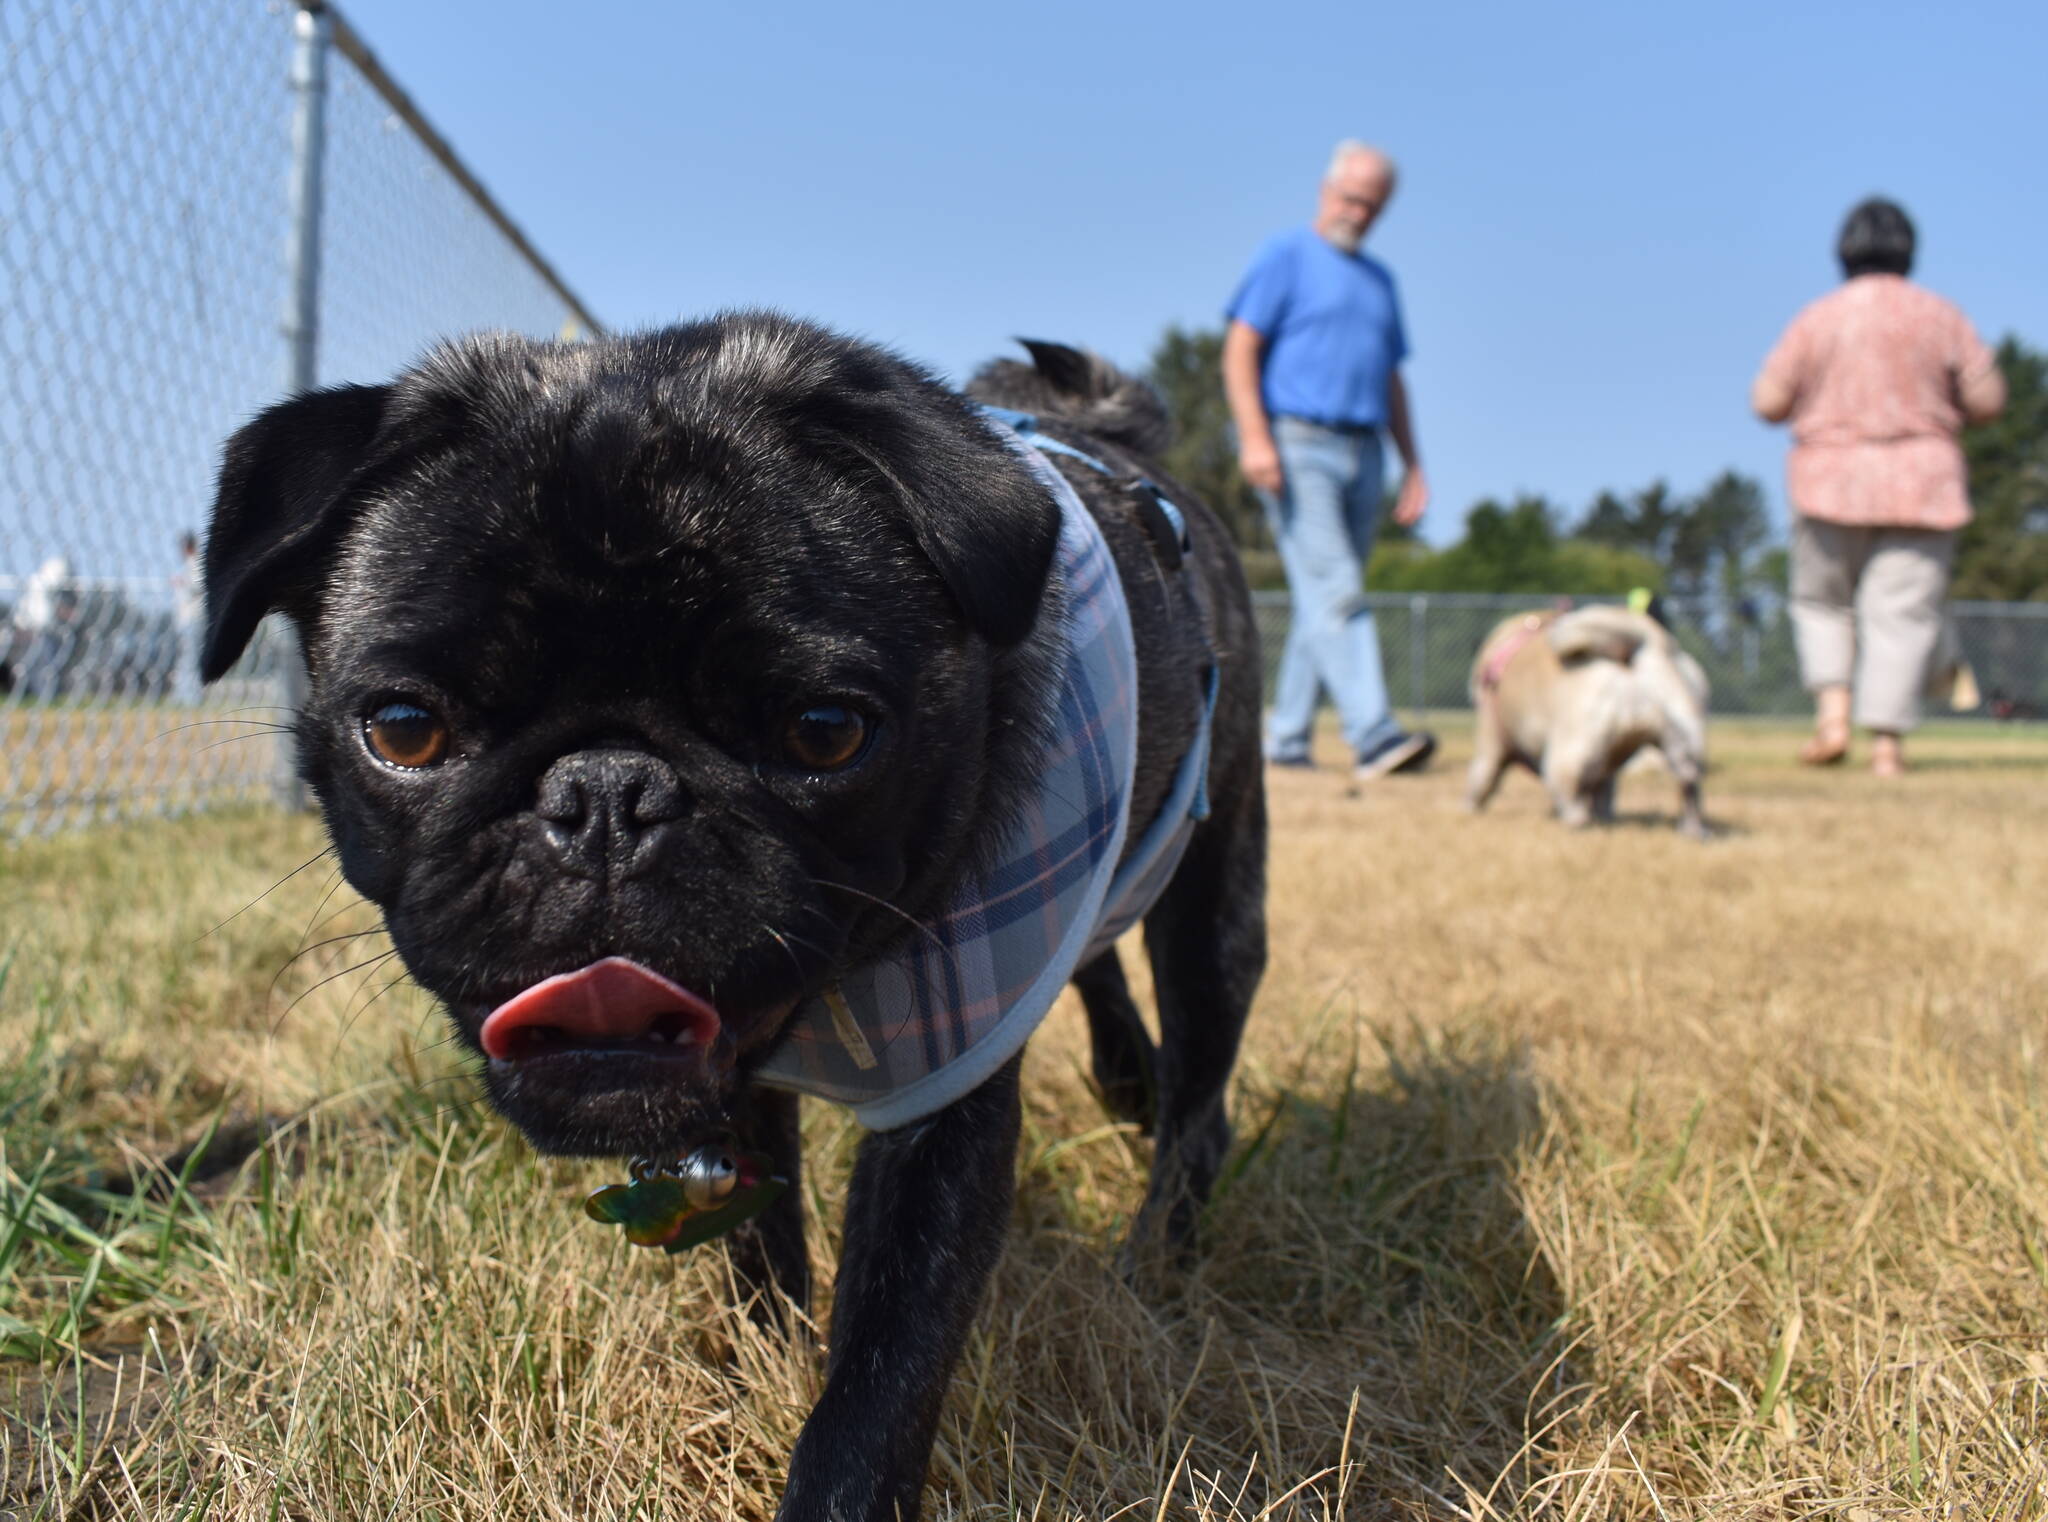 Clayton Franke / The Daily World
Gracie, a black pug owned by Patti Foster-Risse, plods around the new Chinook dog park Thursday, Aug. 24.